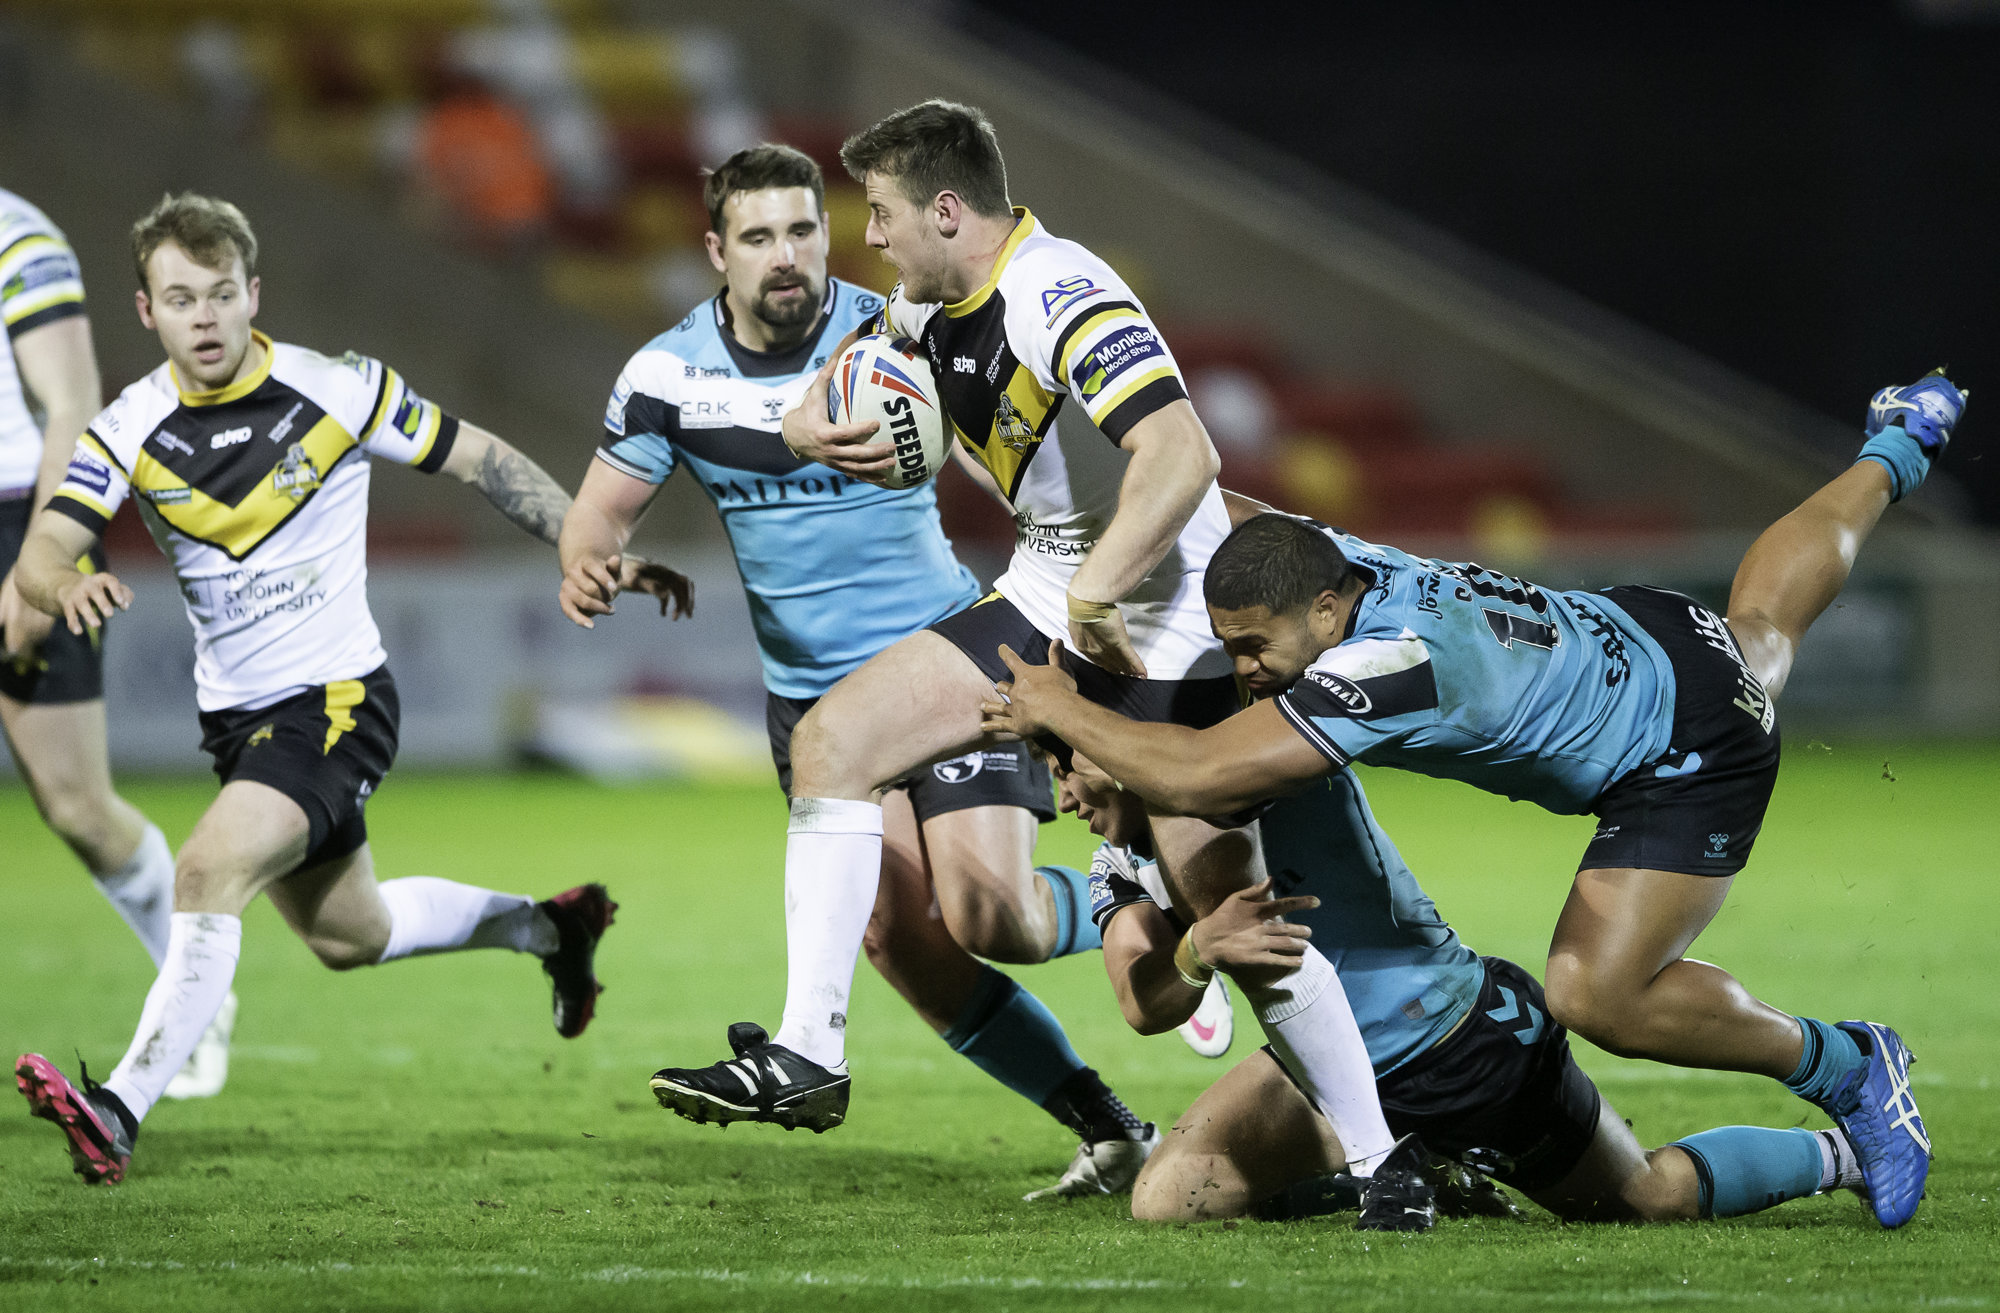 Betfred Challenge Cup Preview Sheffield & York Kick Off The Rugby